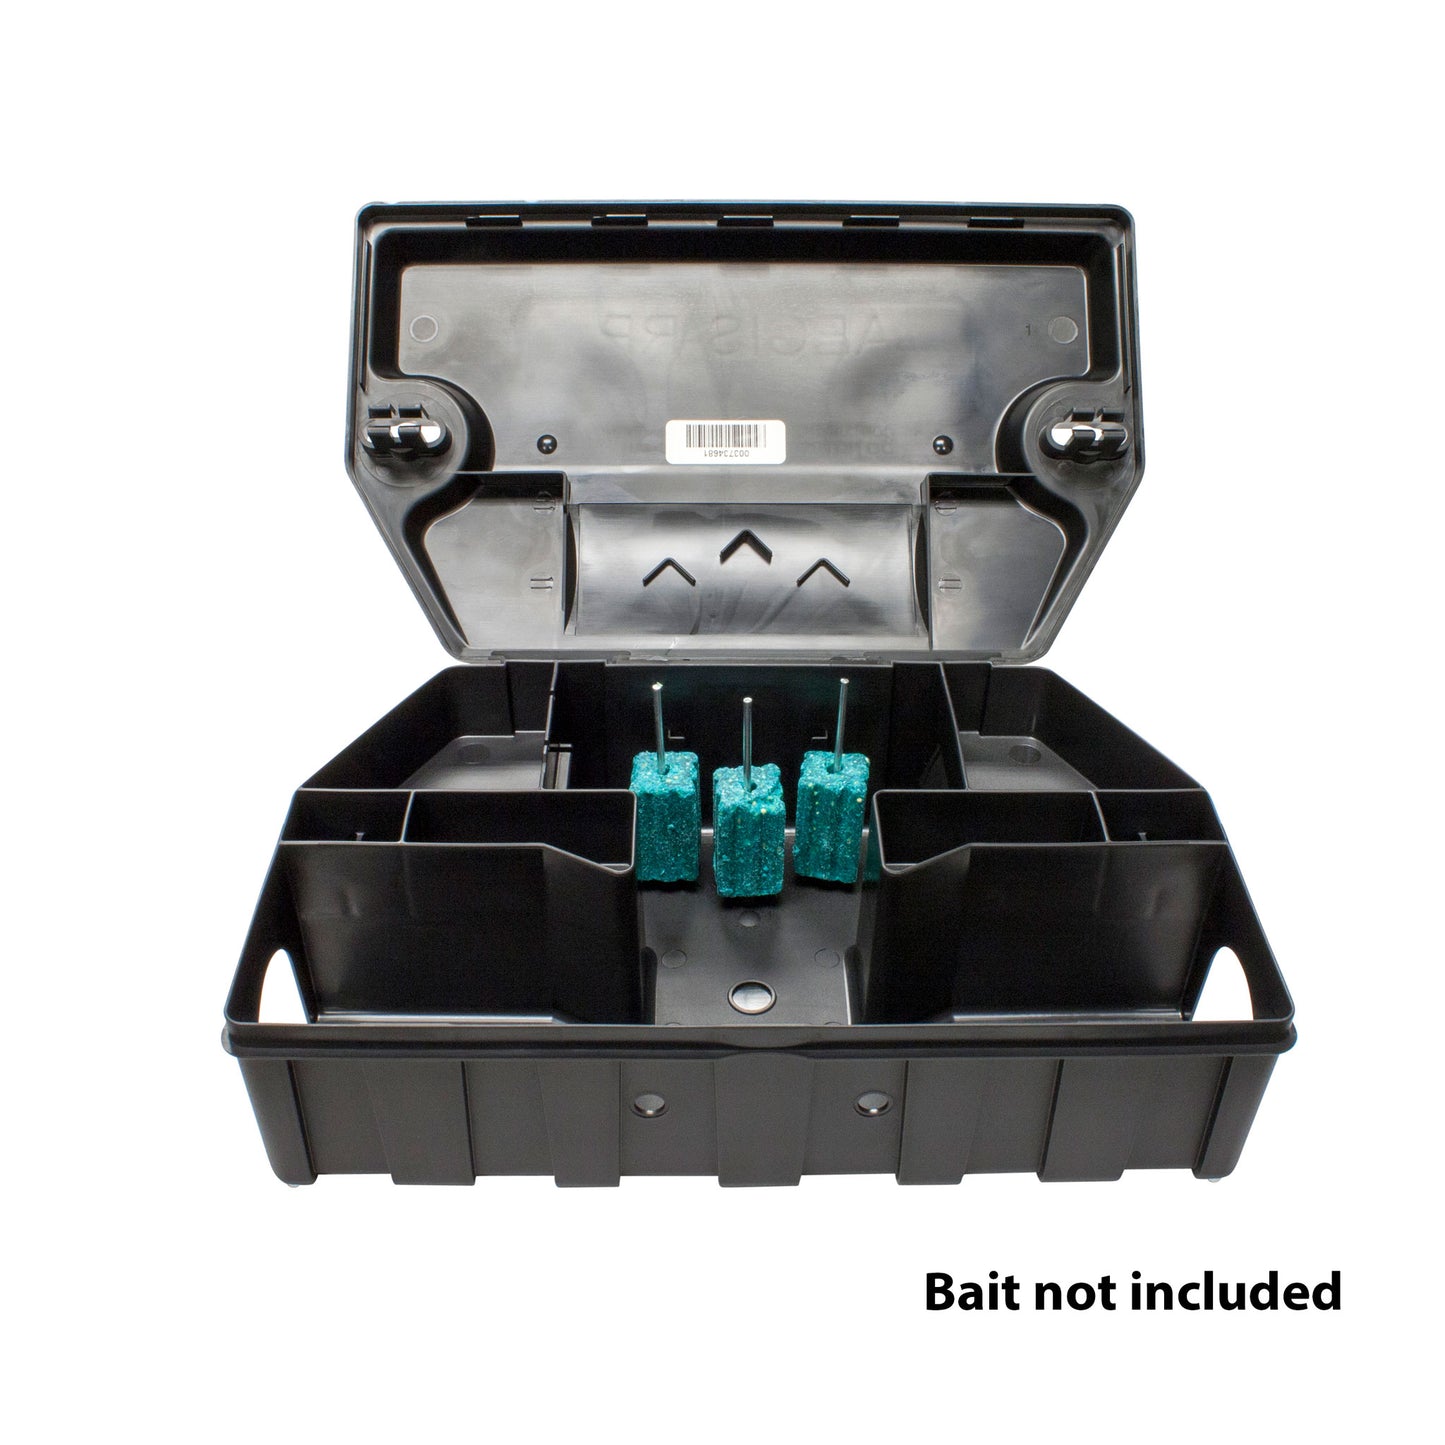 Aegis Rodent Bait Station- (Case of 6 Stations)